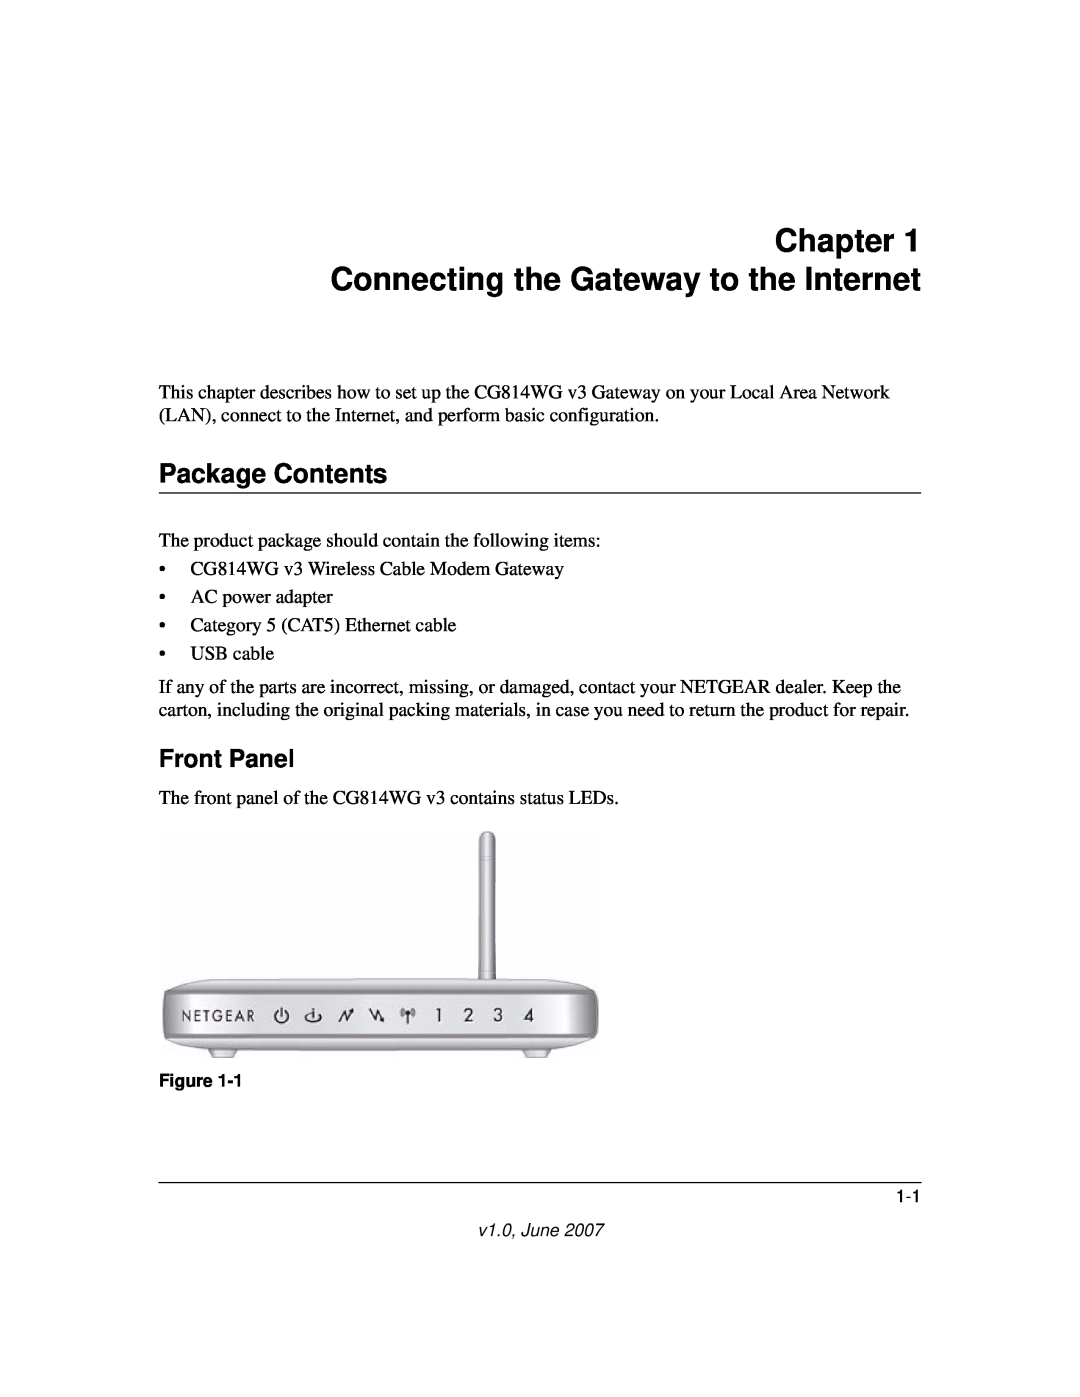 NETGEAR CG814WG V3 manual Connecting the Gateway to the Internet, Package Contents, Front Panel 